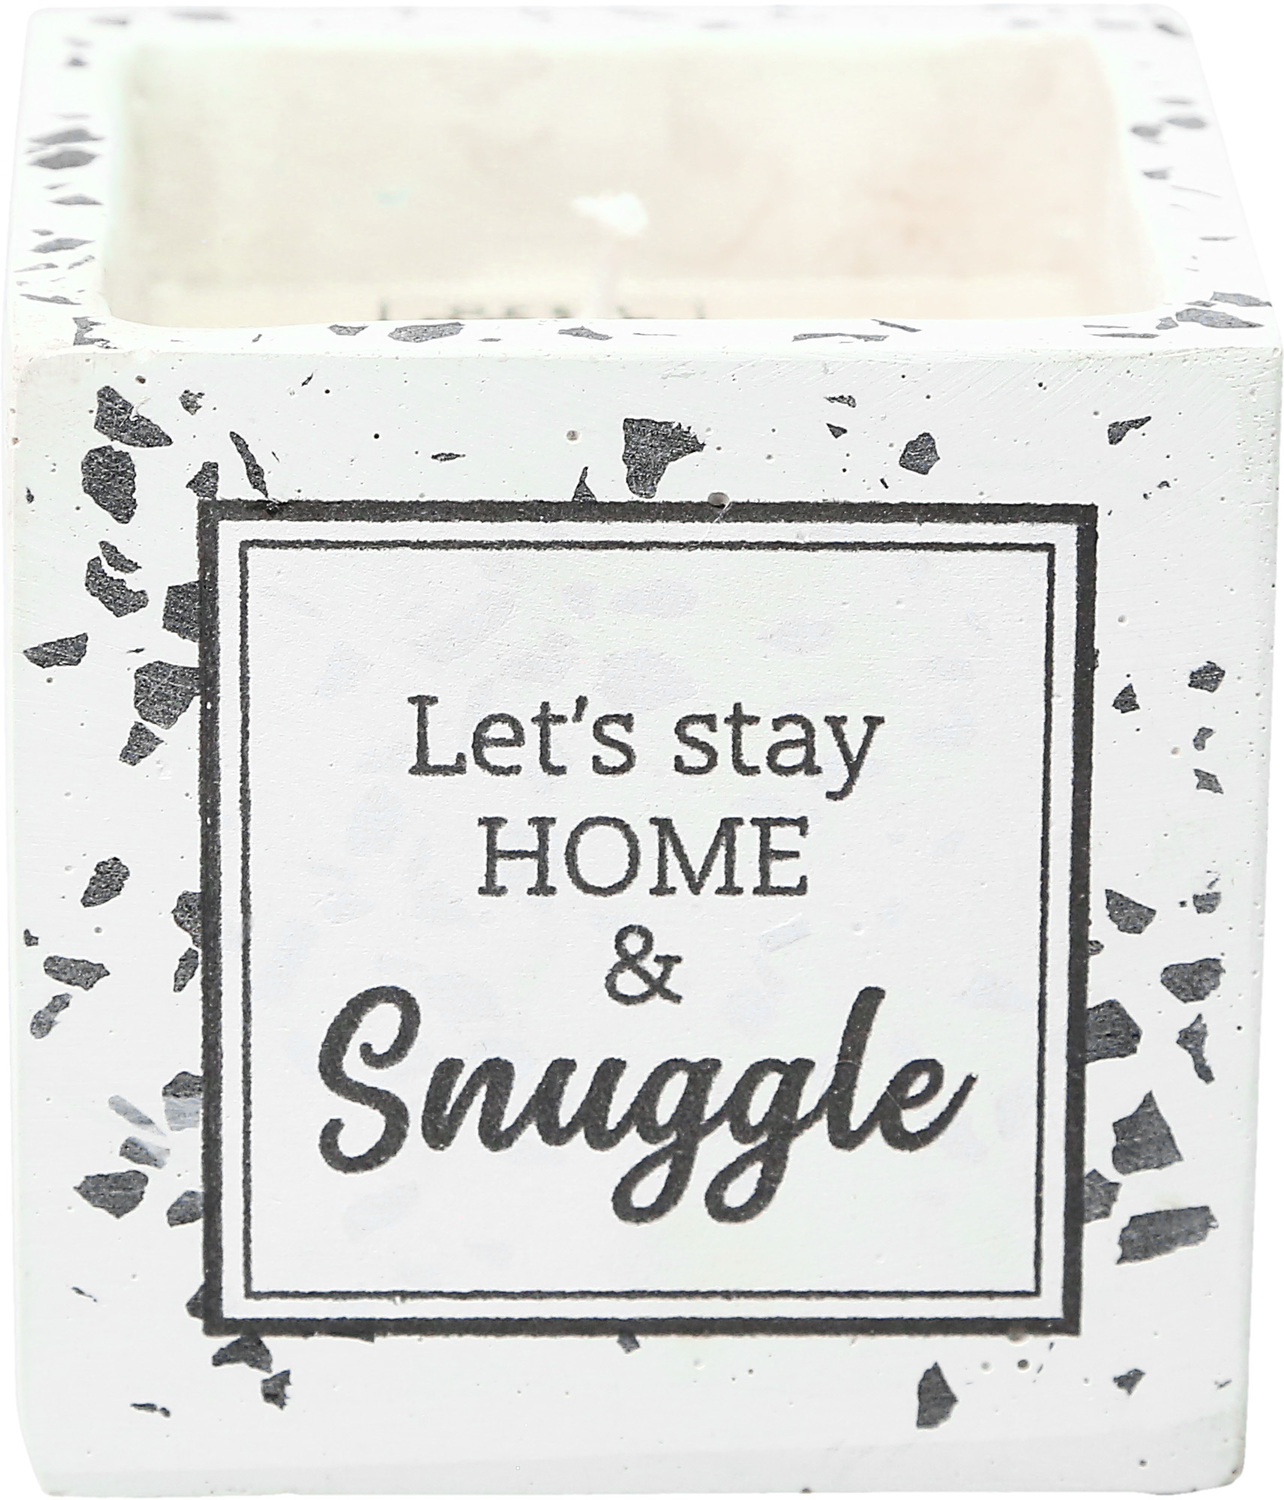 Home by Farmhouse Family - Home - 8 oz - 100% Soy Wax Candle Scent: Tranquility